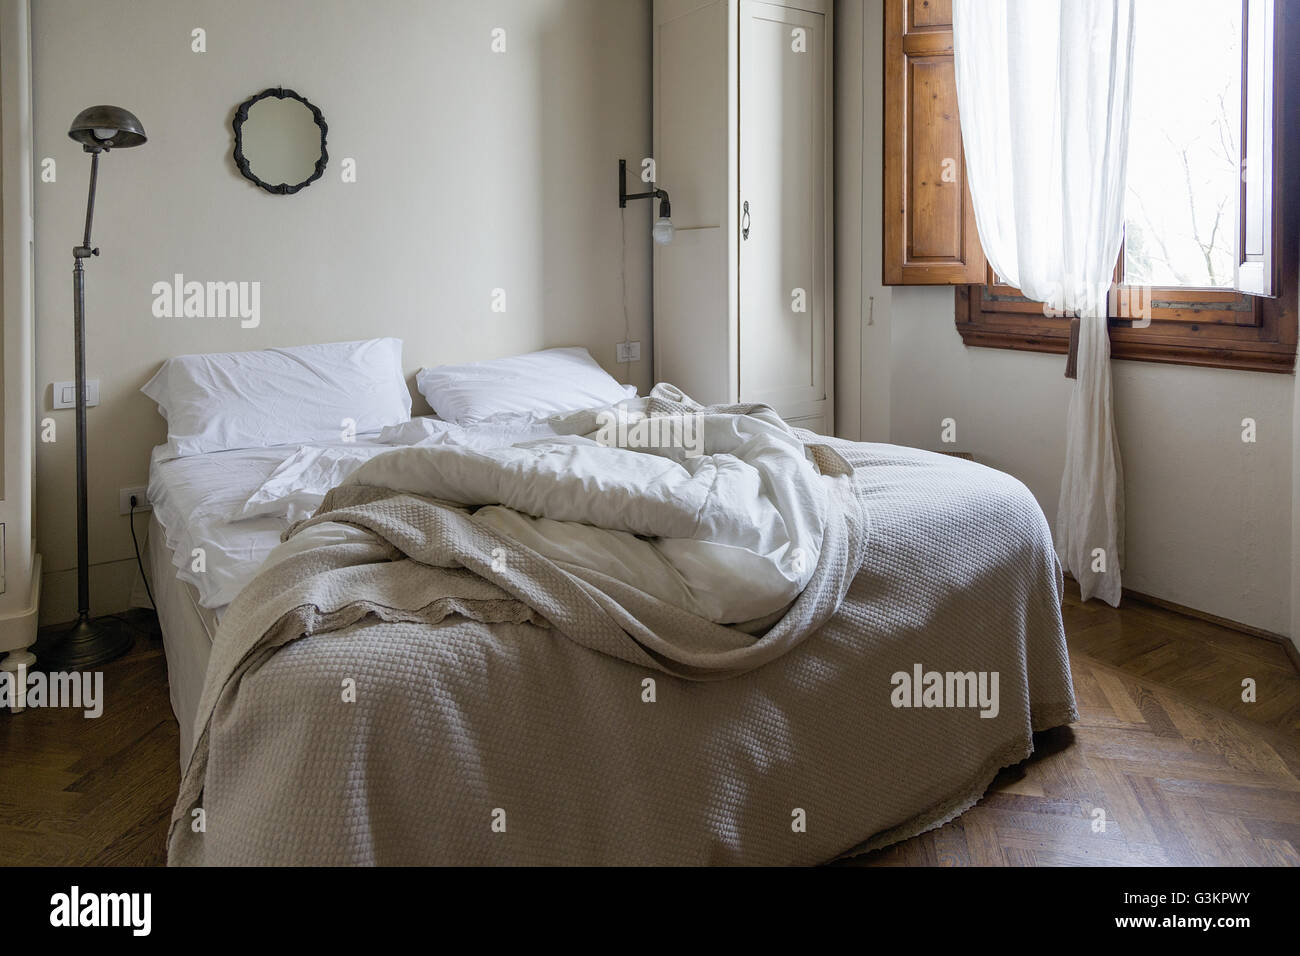 Unmade double bed Stock Photo